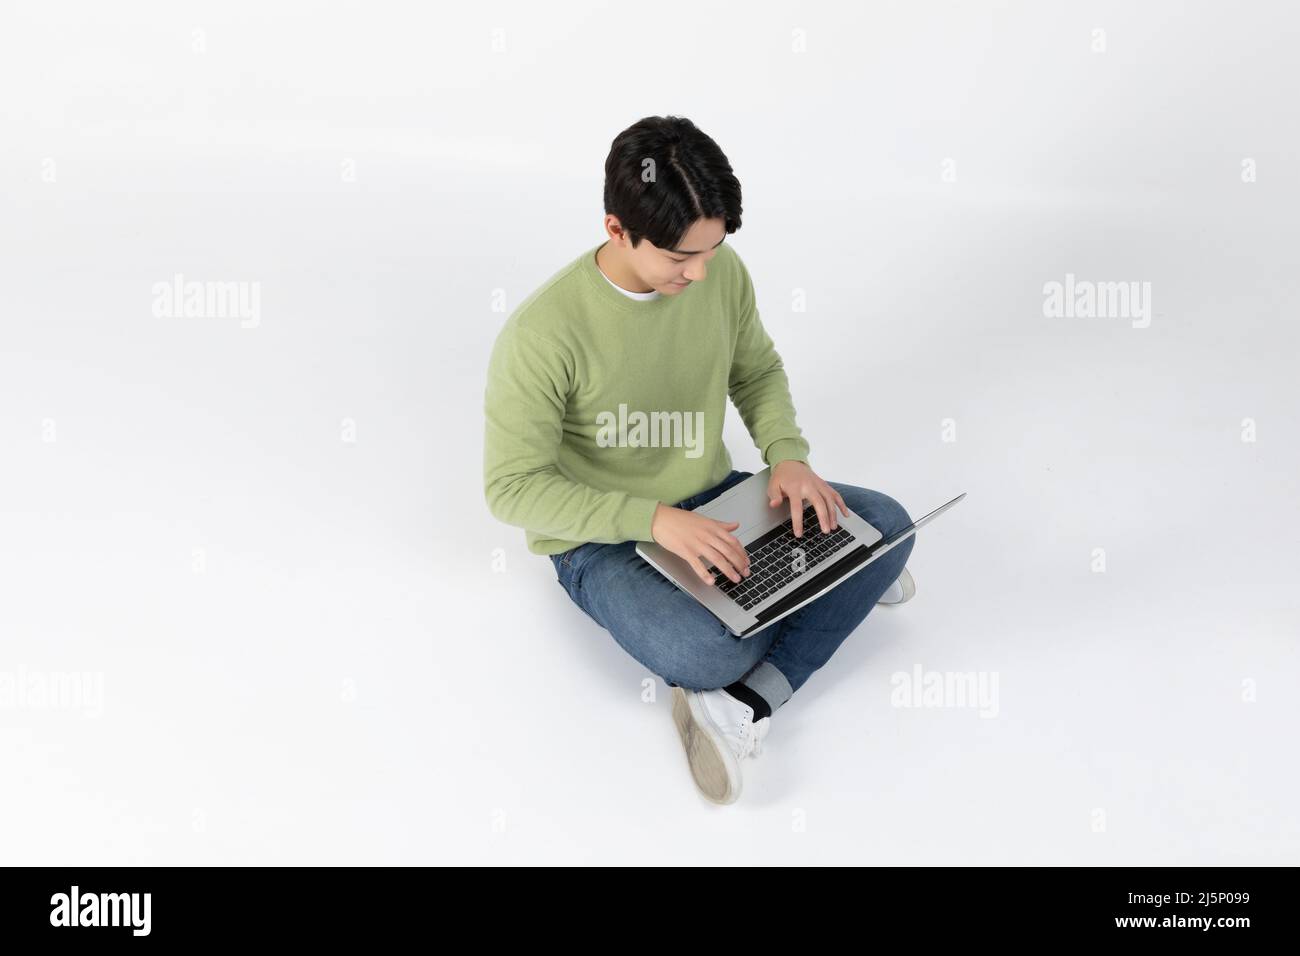 Asian Office Lady Distracted and Thinking while Working on Laptop Stock  Photo - Image of distraction, lifestyle: 157083416